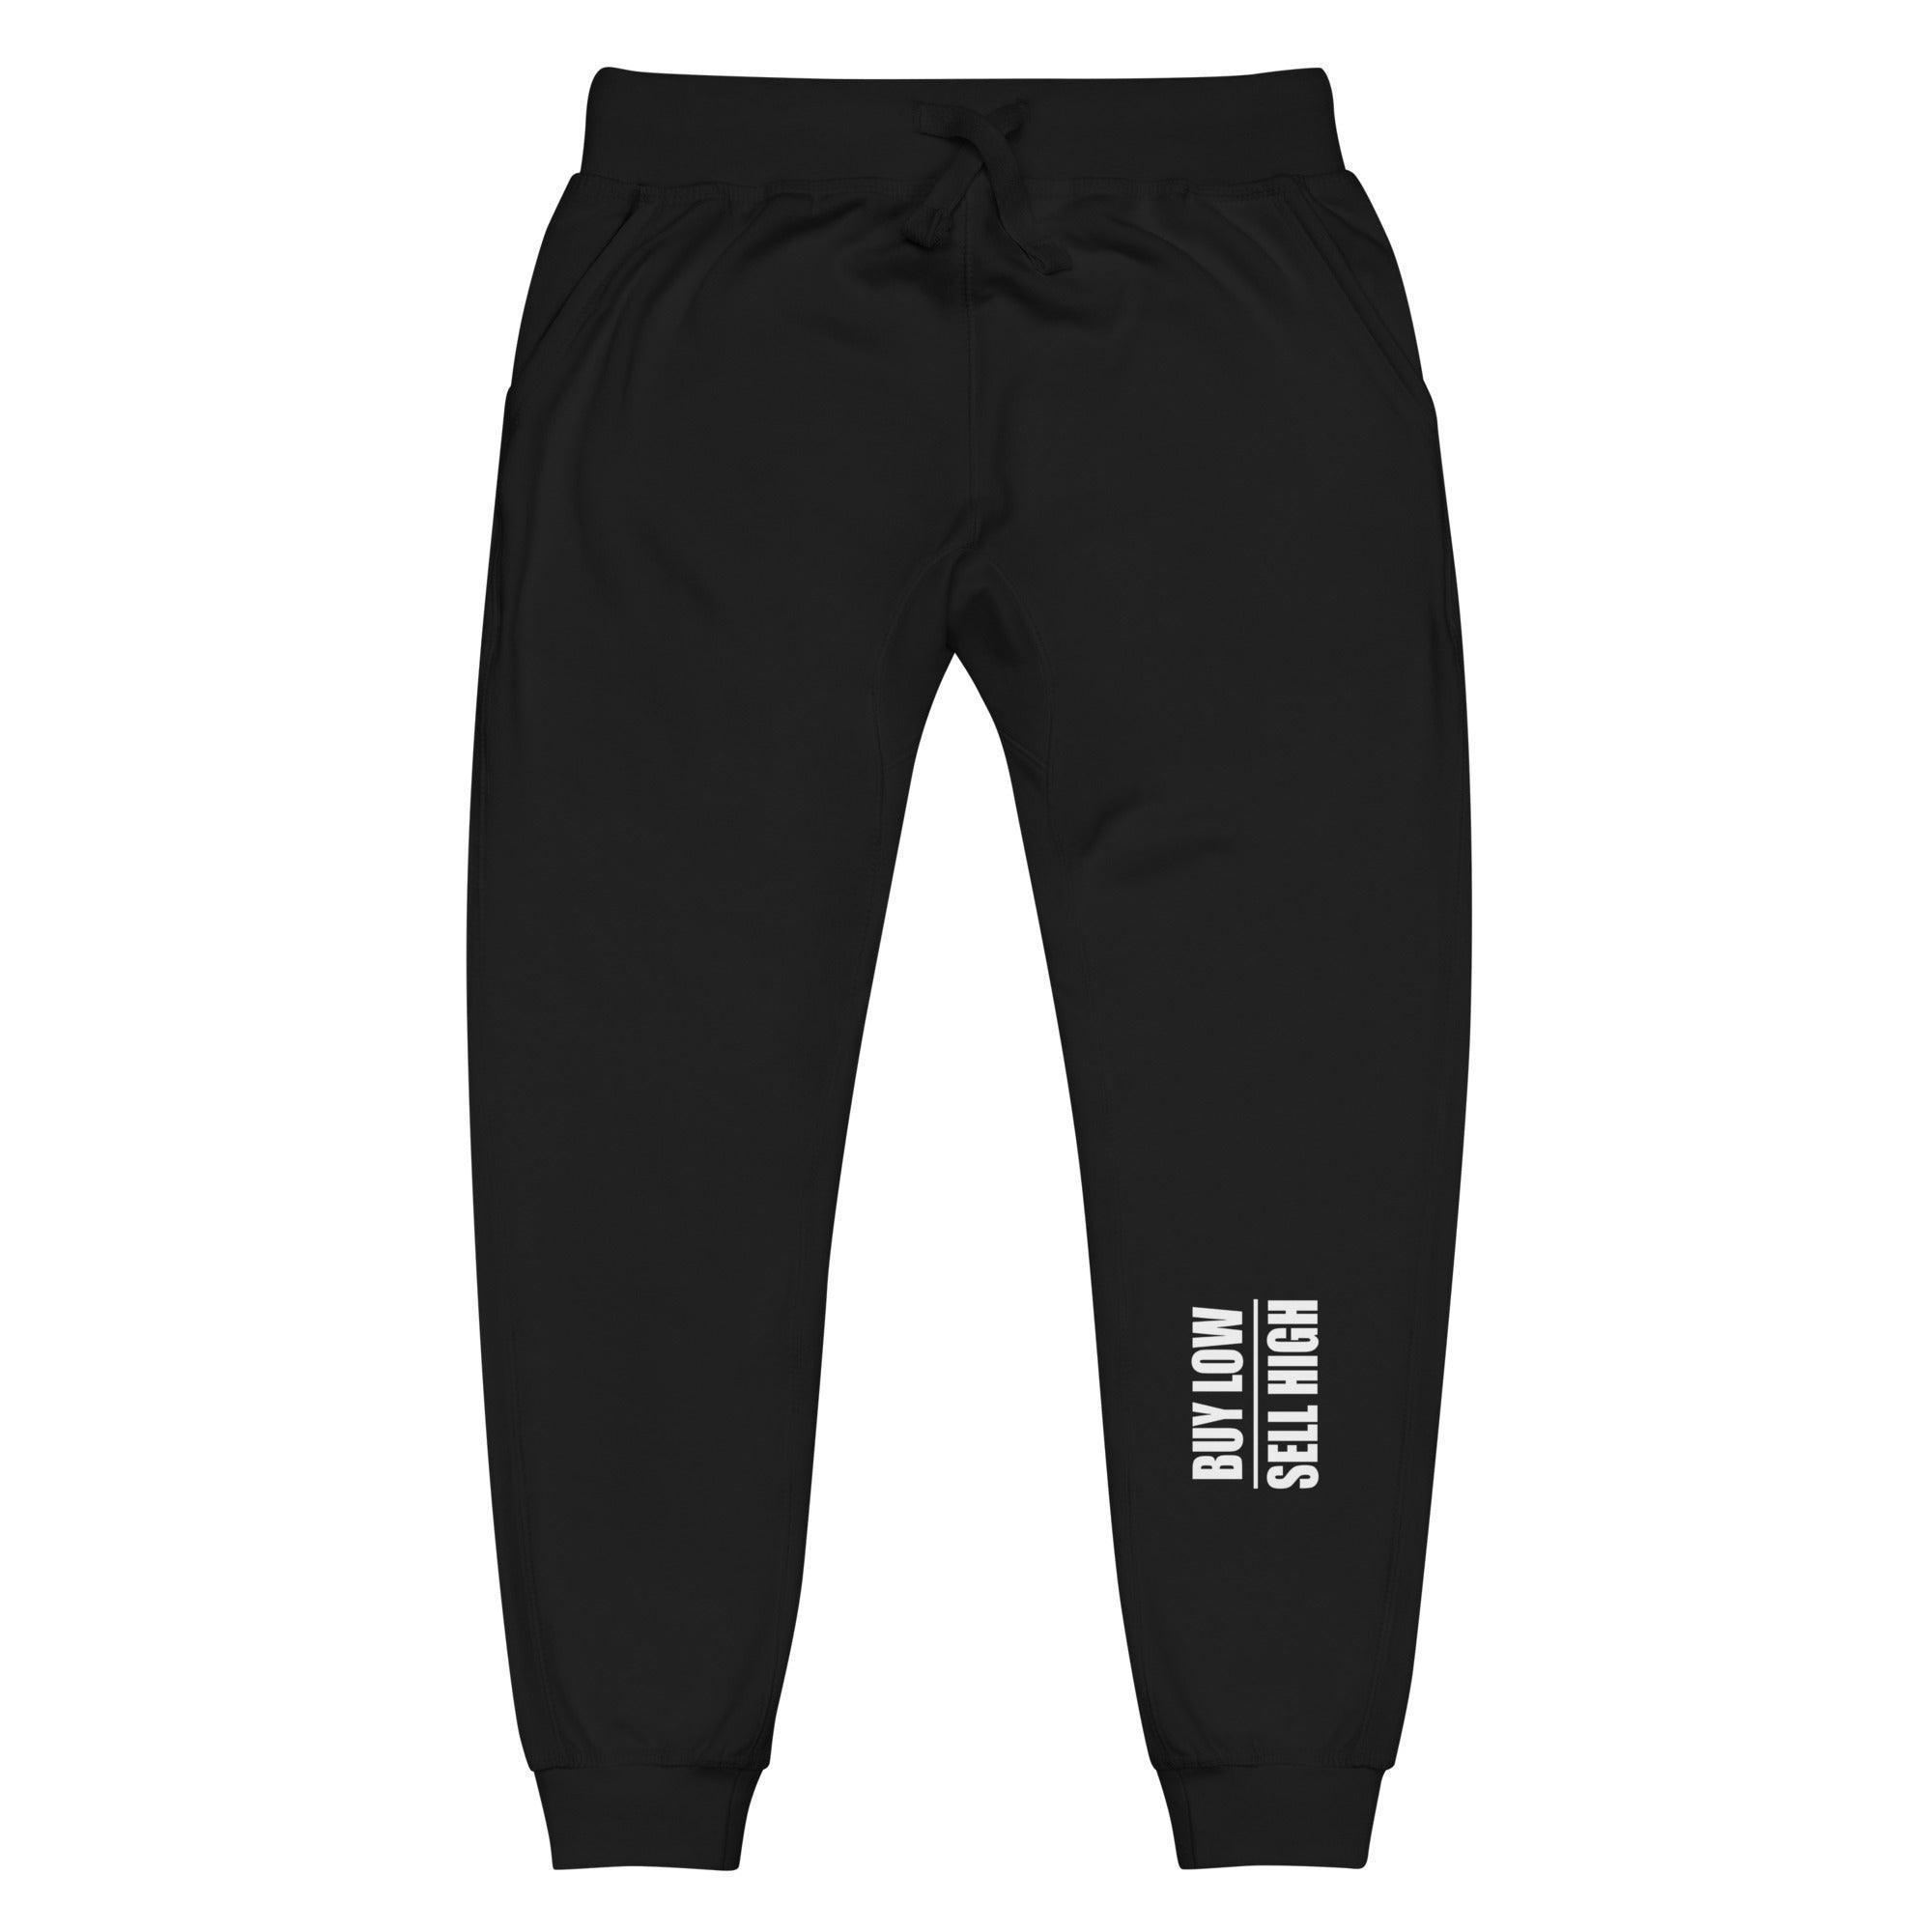 Buy Low | Sell High Sweatpants - InvestmenTees